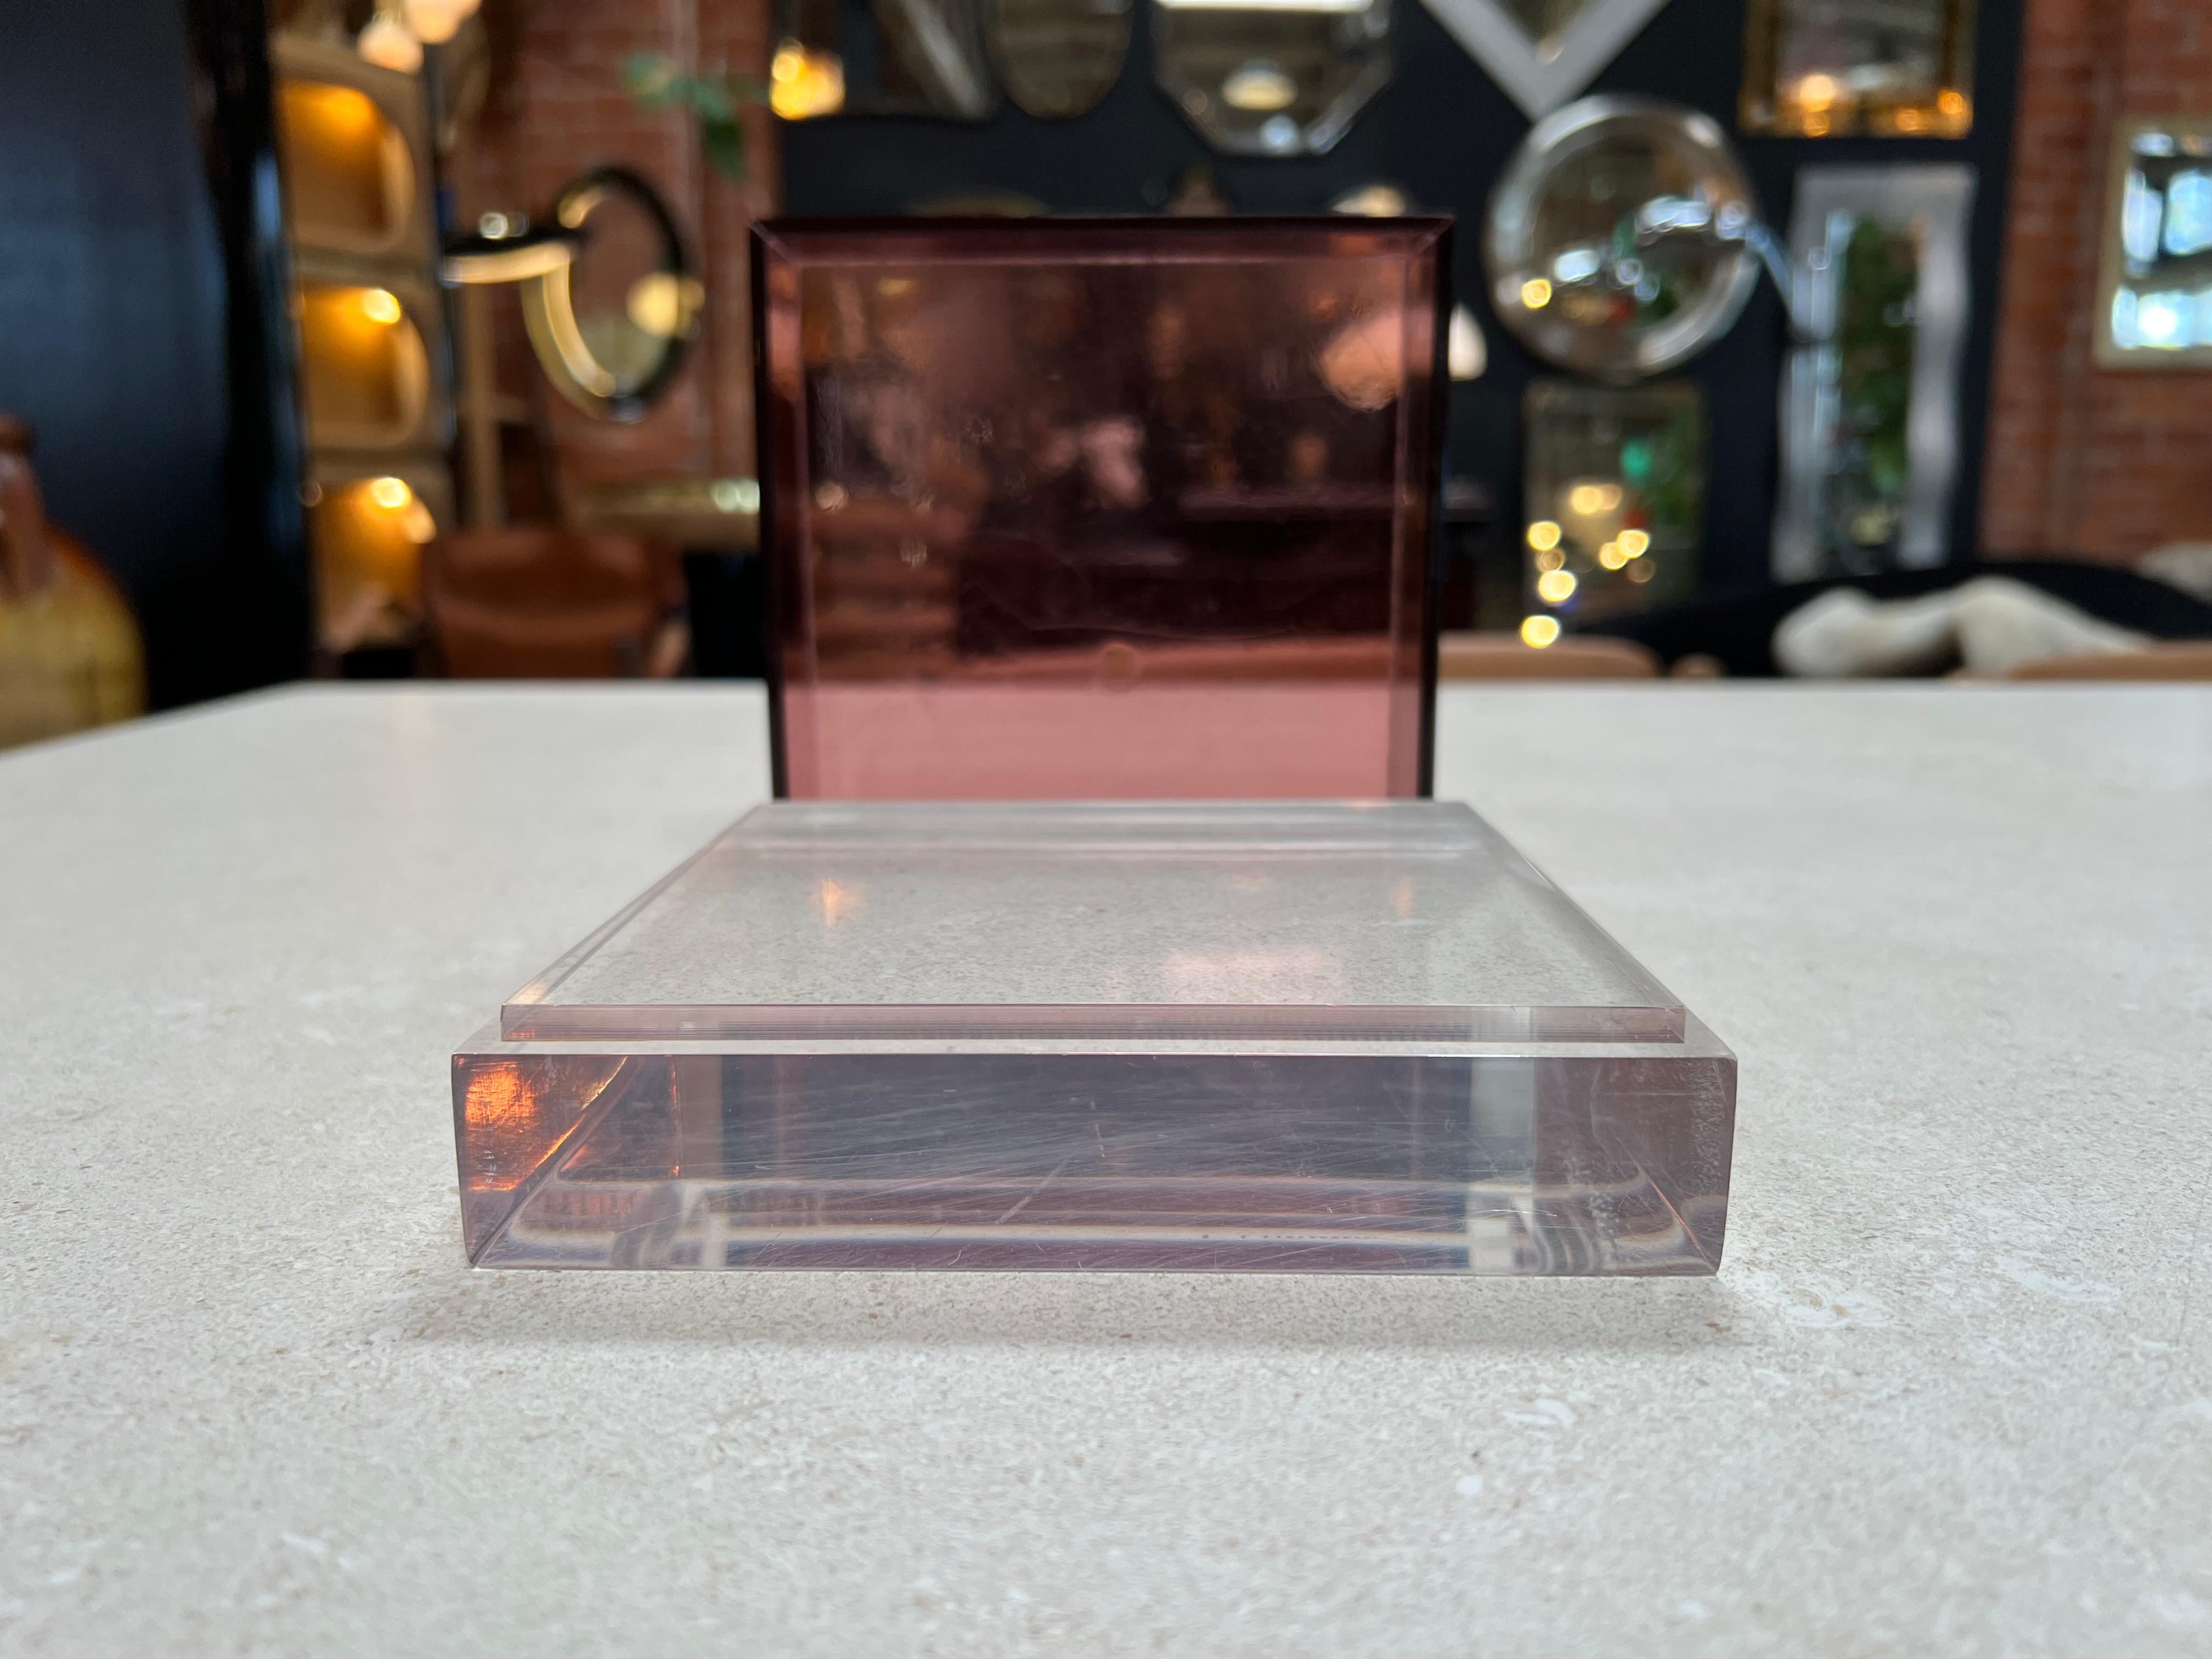 Vintage Italian Decorative Plexiglass Box 1980s: A unique and stylish decorative box from 1980s Italy, crafted with transparent plexiglass material. This exquisite piece features a modern design and showcases the artistic ingenuity of Italian